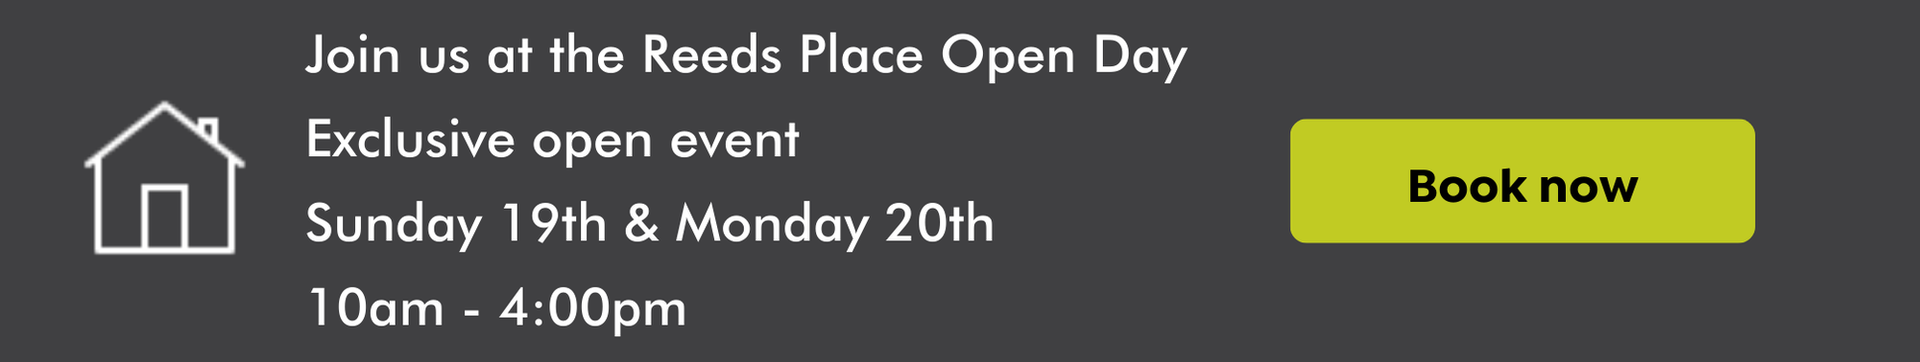 Reeds place open day